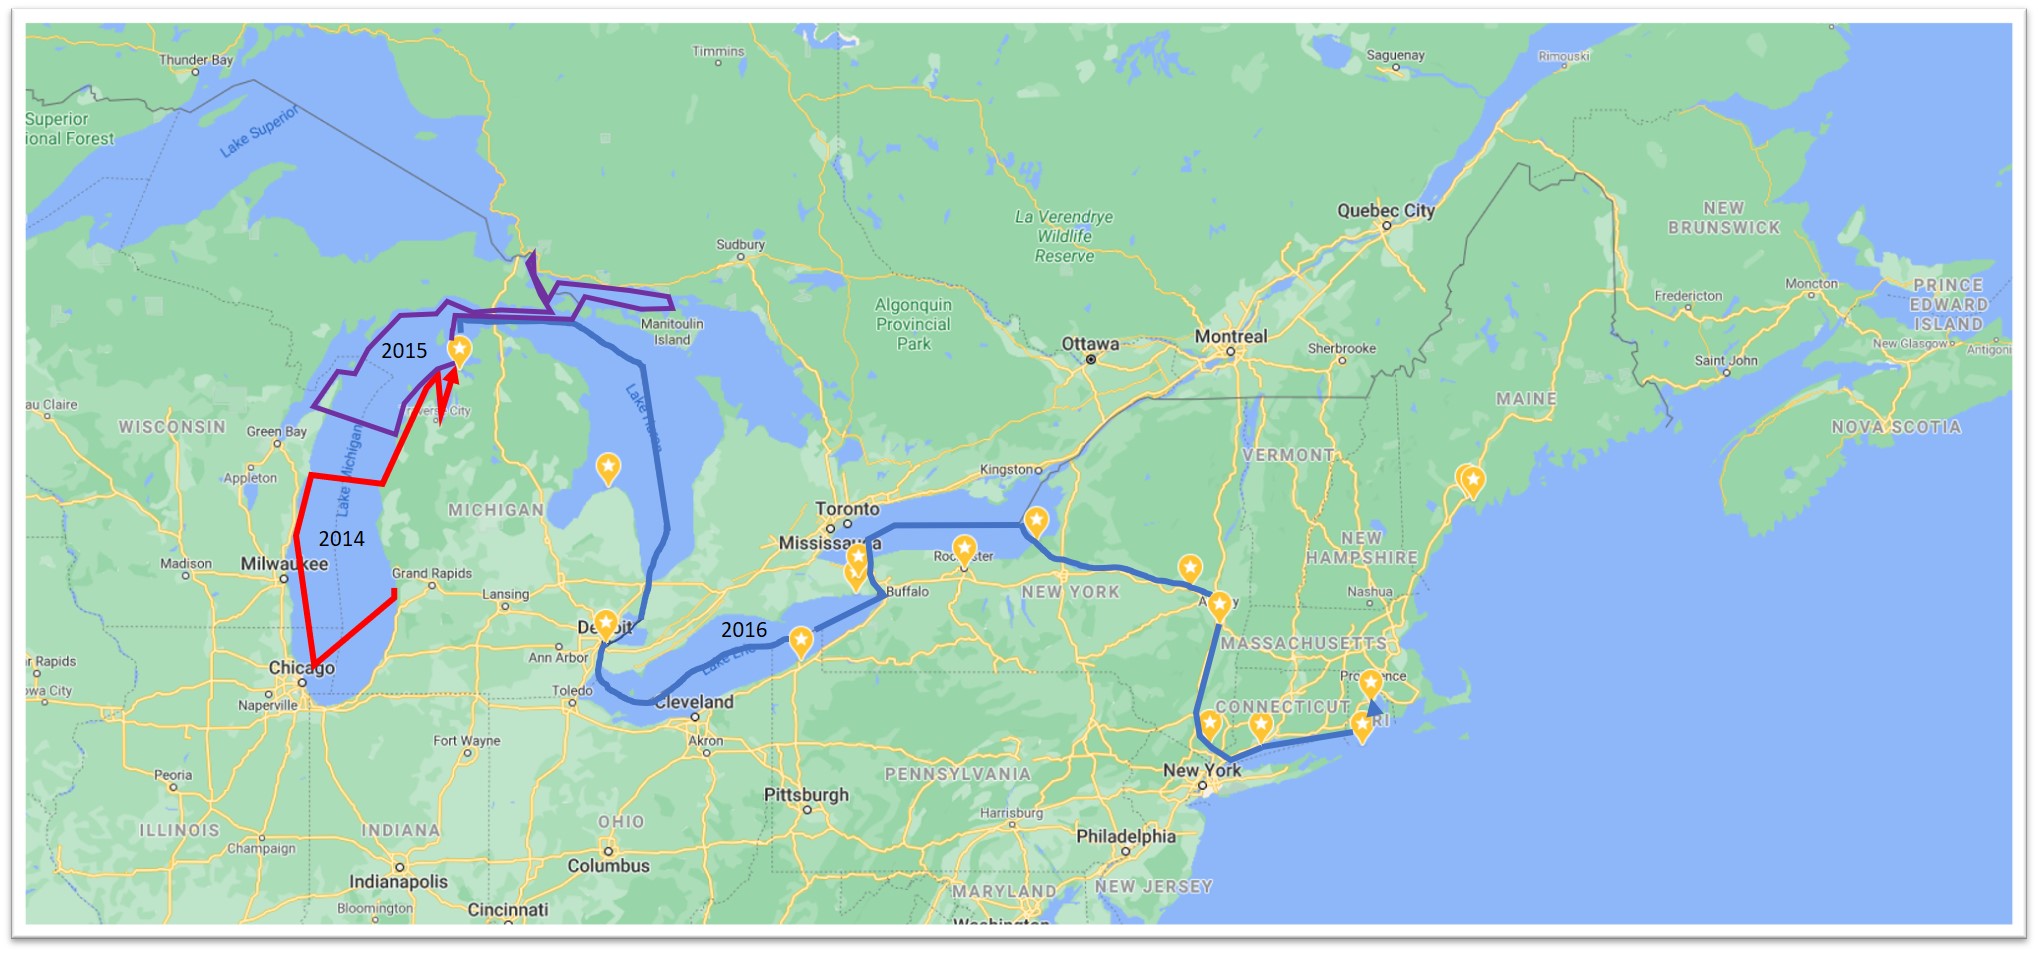 Northern Exposure 2014, 2015, and 2016 itineraries